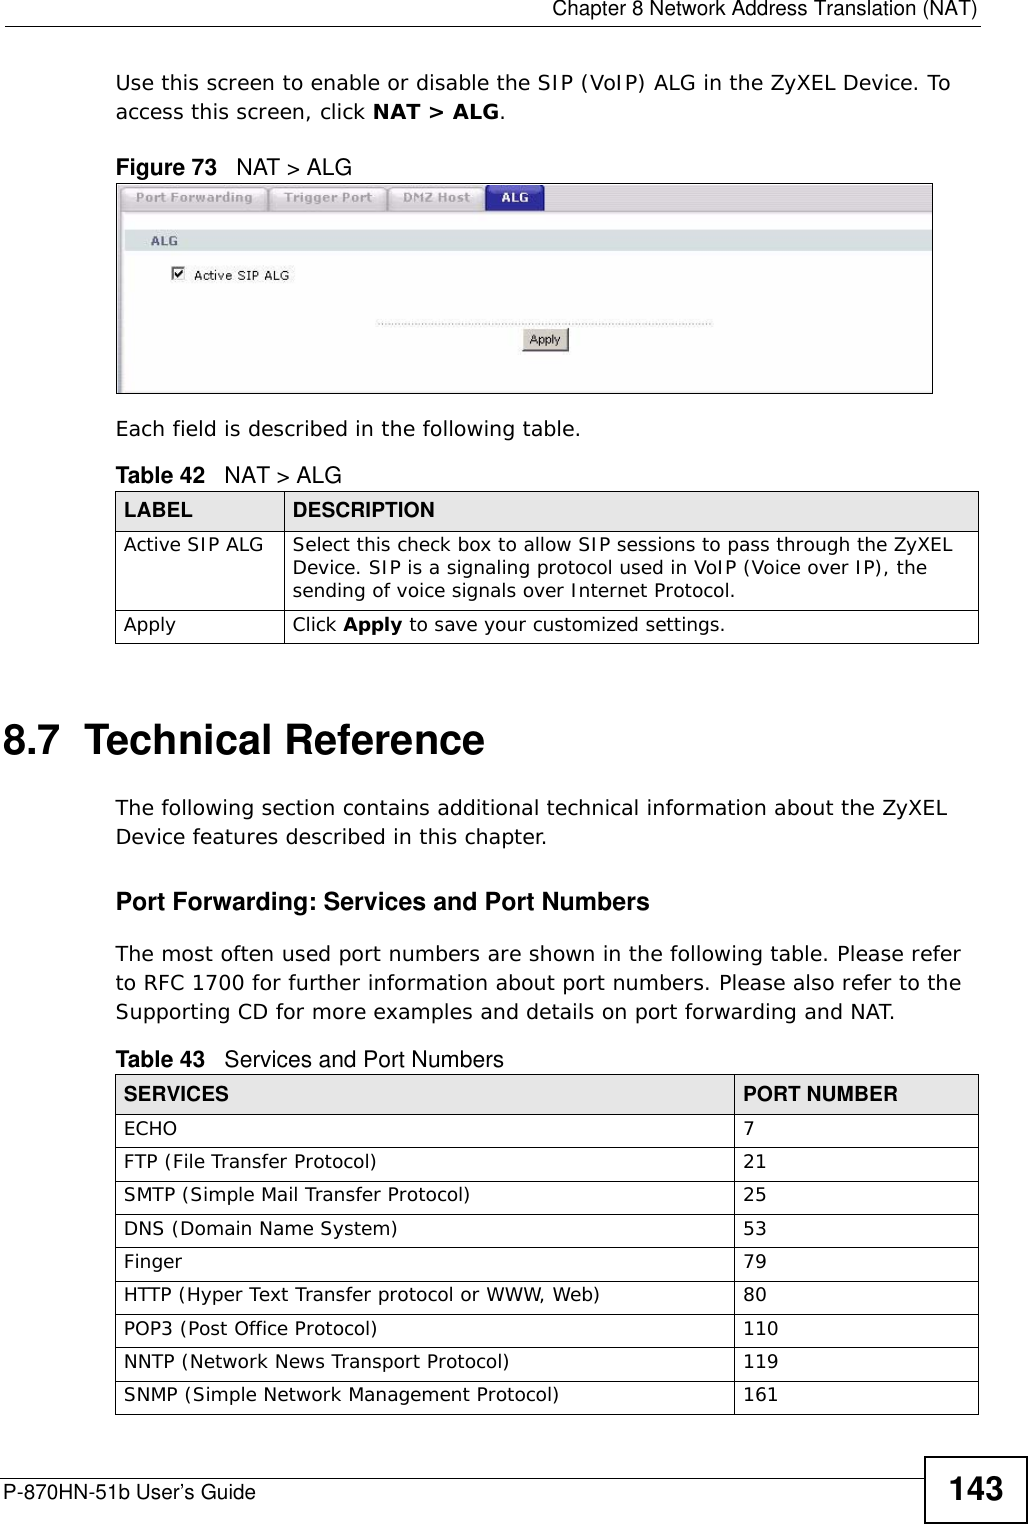  Chapter 8 Network Address Translation (NAT)P-870HN-51b User’s Guide 143Use this screen to enable or disable the SIP (VoIP) ALG in the ZyXEL Device. To access this screen, click NAT &gt; ALG.Figure 73   NAT &gt; ALGEach field is described in the following table.8.7  Technical ReferenceThe following section contains additional technical information about the ZyXEL Device features described in this chapter.Port Forwarding: Services and Port NumbersThe most often used port numbers are shown in the following table. Please refer to RFC 1700 for further information about port numbers. Please also refer to the Supporting CD for more examples and details on port forwarding and NAT.Table 42   NAT &gt; ALGLABEL DESCRIPTIONActive SIP ALG Select this check box to allow SIP sessions to pass through the ZyXEL Device. SIP is a signaling protocol used in VoIP (Voice over IP), the sending of voice signals over Internet Protocol.Apply Click Apply to save your customized settings.Table 43   Services and Port NumbersSERVICES PORT NUMBERECHO 7FTP (File Transfer Protocol) 21SMTP (Simple Mail Transfer Protocol) 25DNS (Domain Name System) 53Finger 79HTTP (Hyper Text Transfer protocol or WWW, Web) 80POP3 (Post Office Protocol) 110NNTP (Network News Transport Protocol) 119SNMP (Simple Network Management Protocol) 161